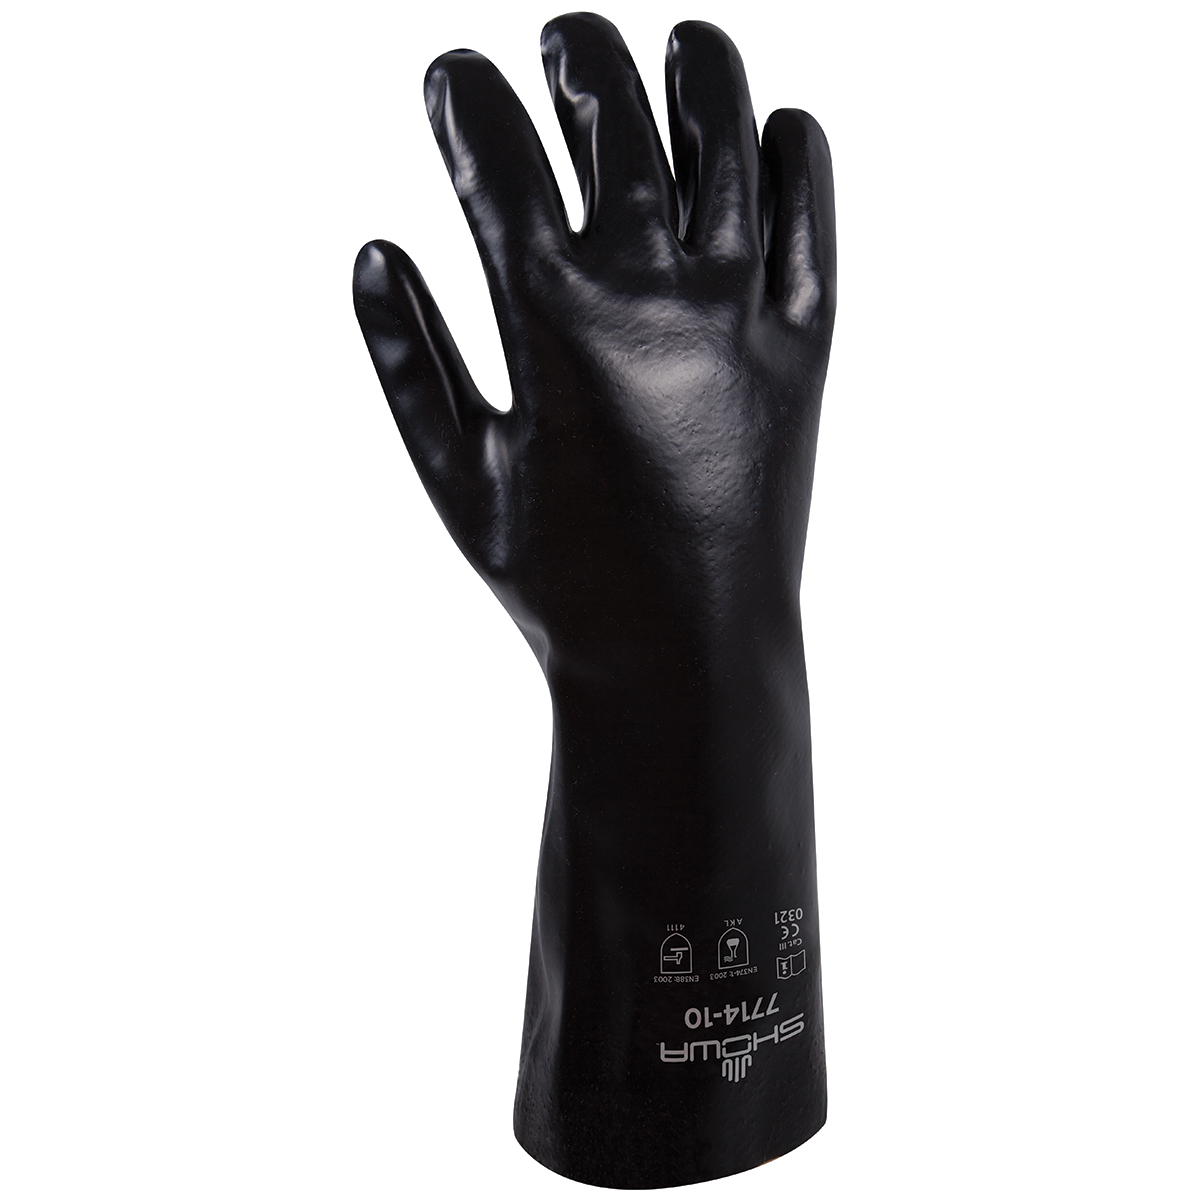 Chemical resistant PVC fully coated 14" gauntlet w/jersey liner, Sanitized, black, smooth, large